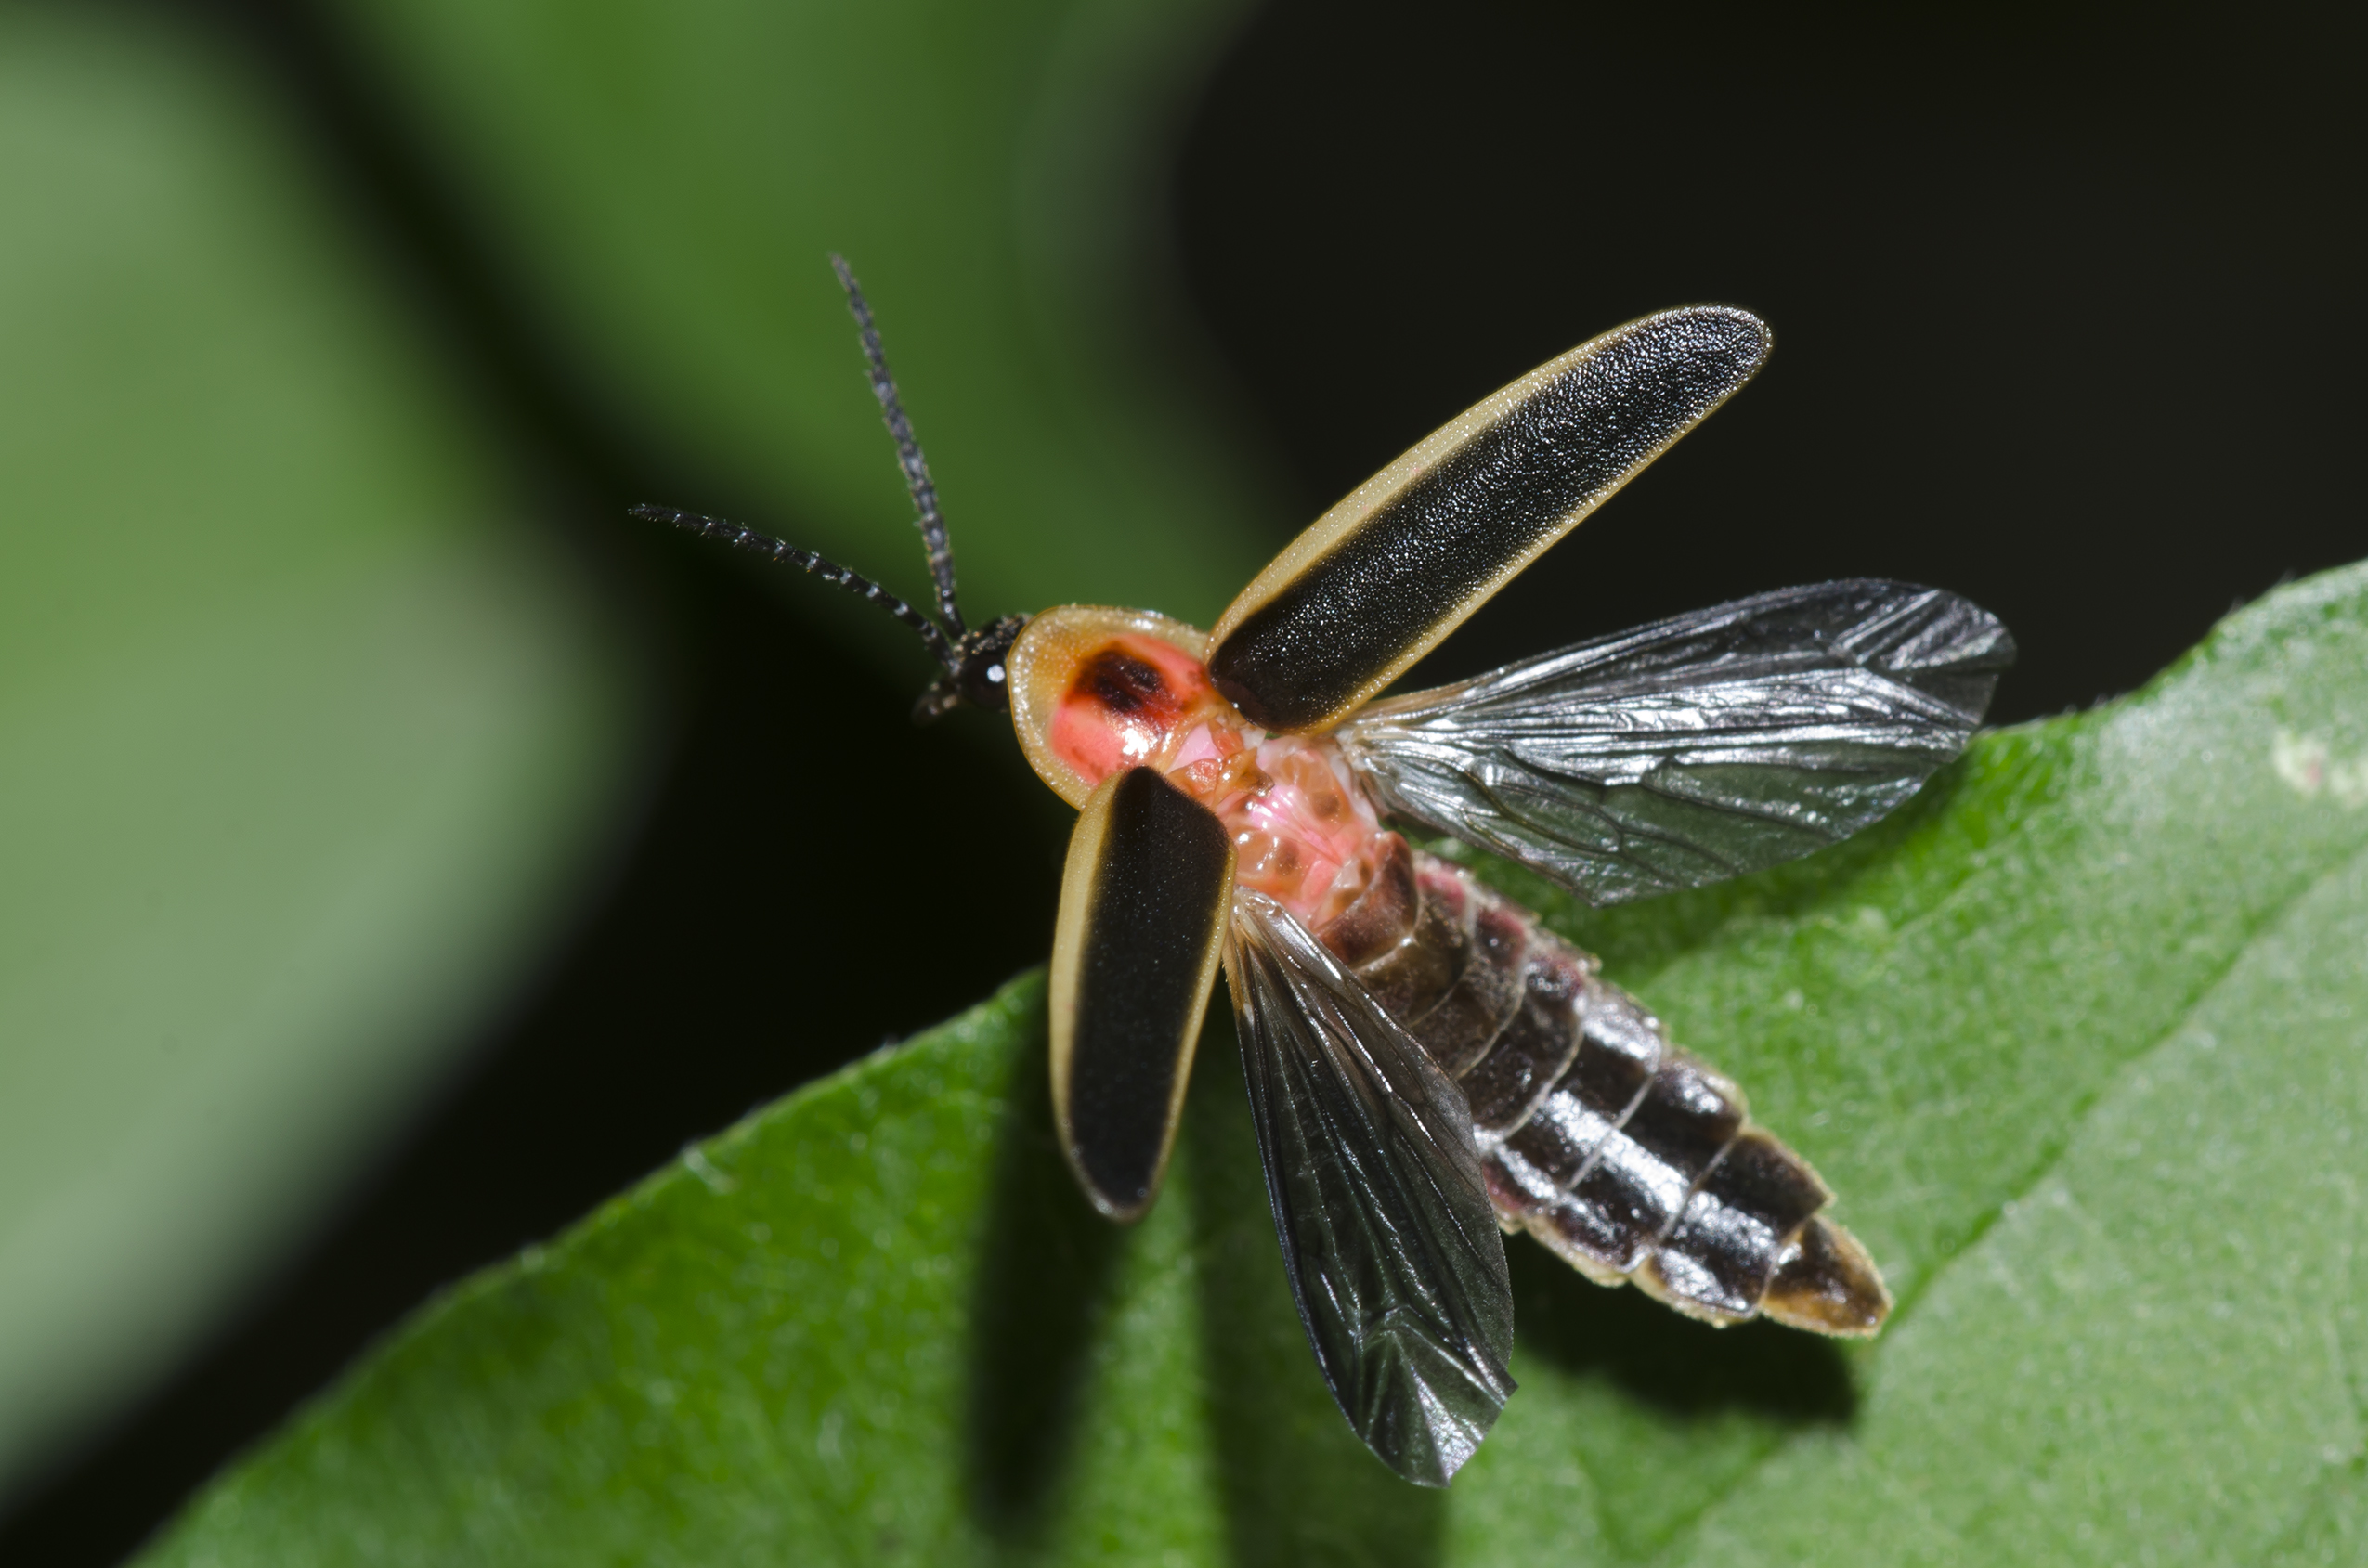 An adult firefly opens its wings and prepares to take off from a leaf.